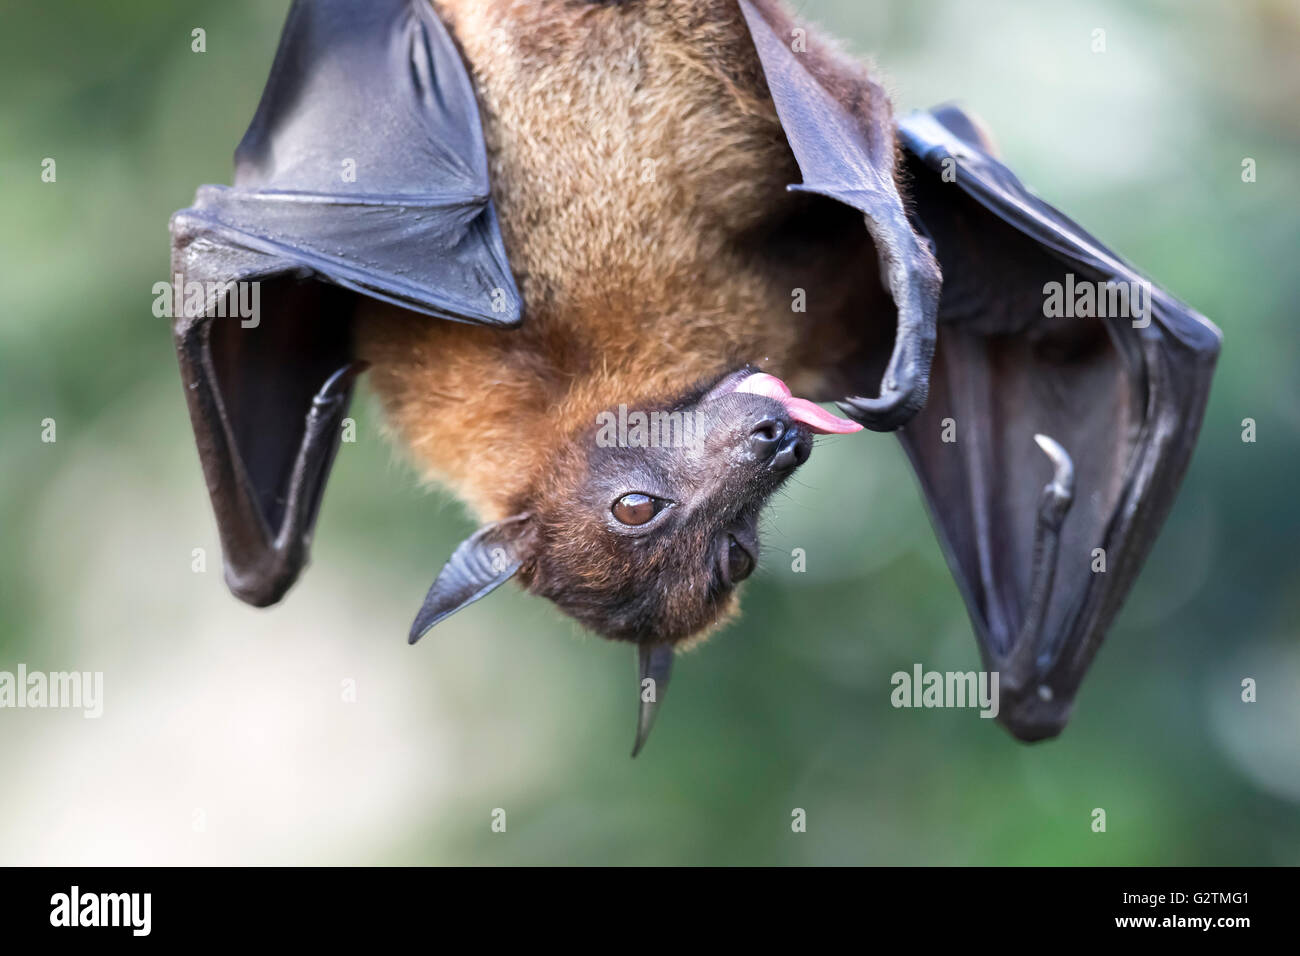 Indian flying fox o maggiore frutto indiano bat (Pteropus giganteus) appesi, captive Foto Stock